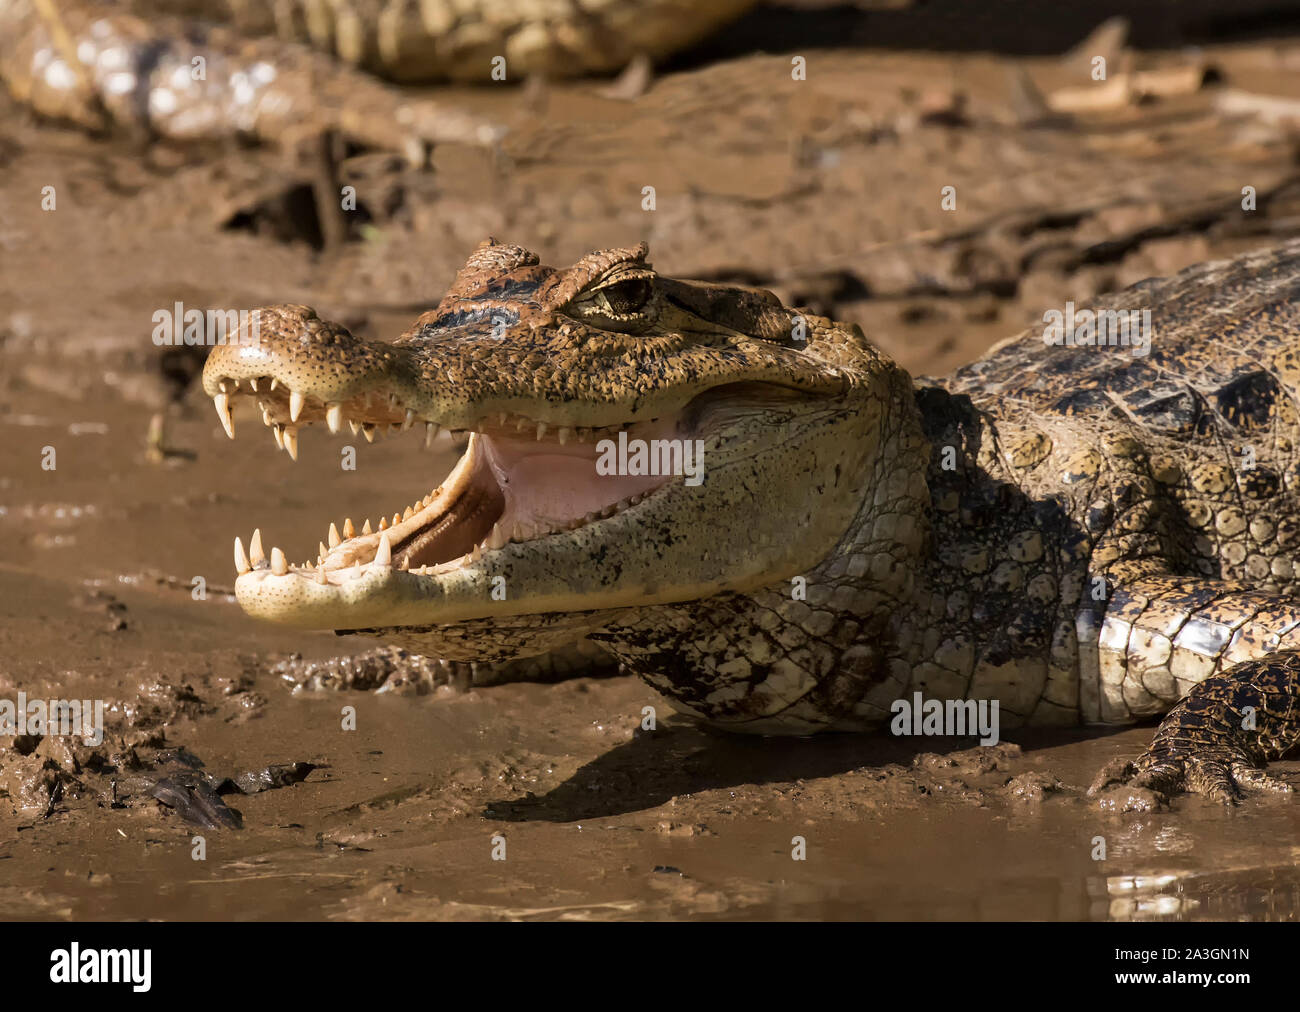 Spectacled caiman Stock Photo